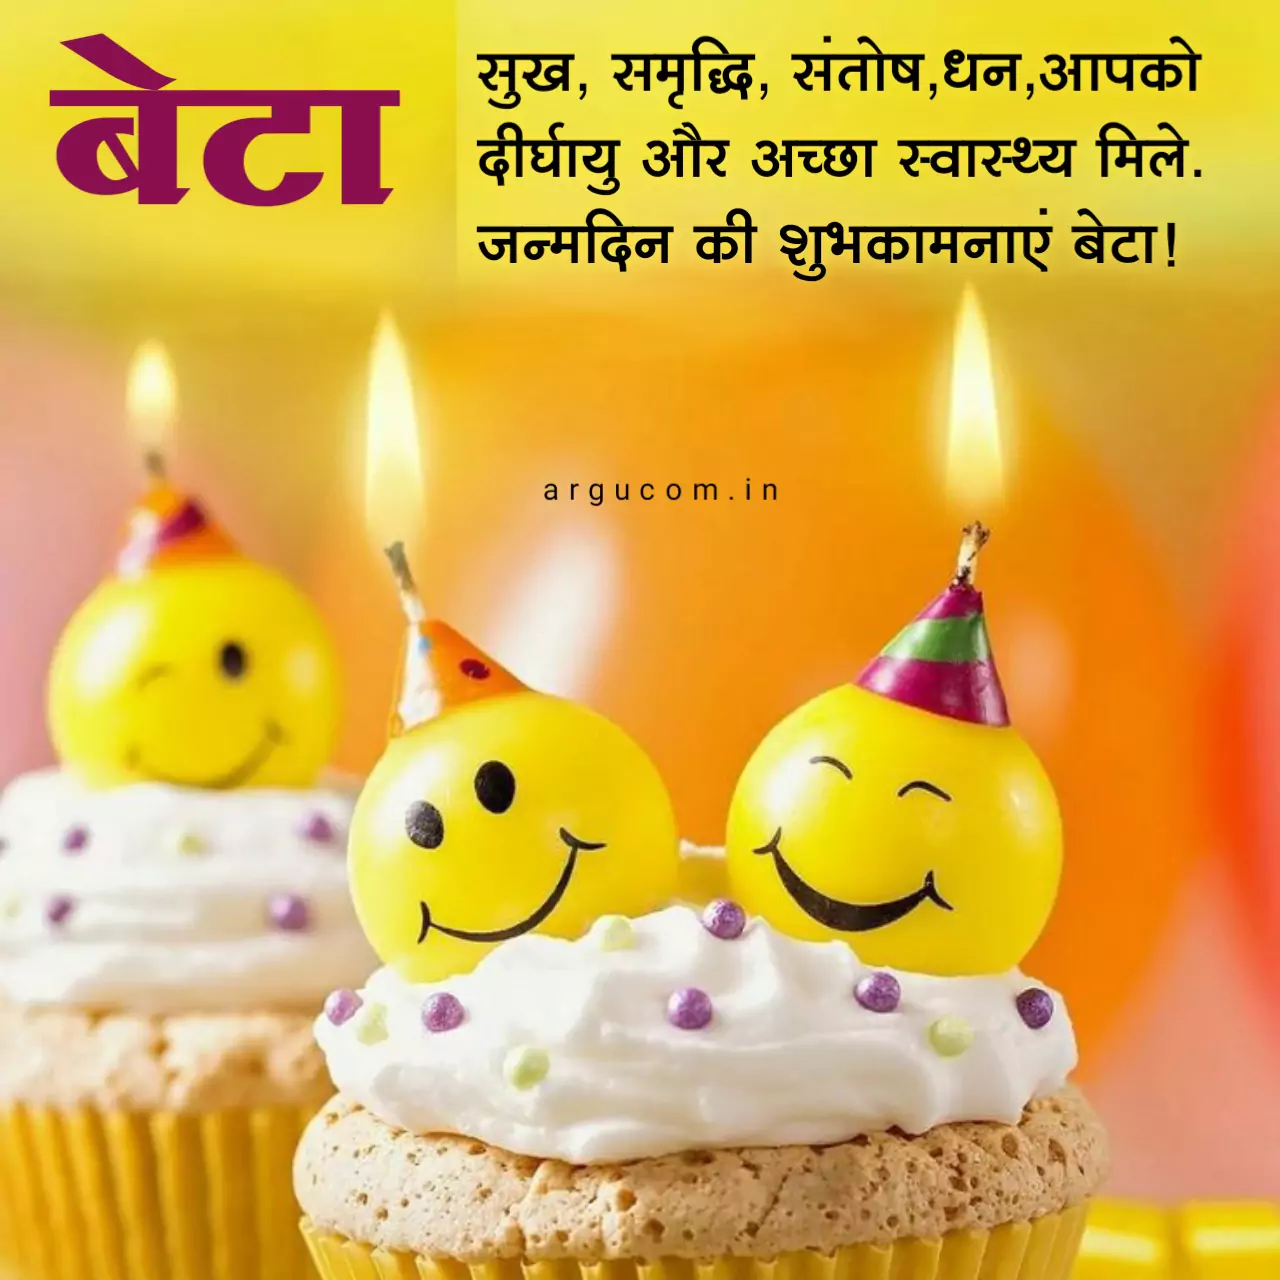 Happy birthday wishes for son in hindi